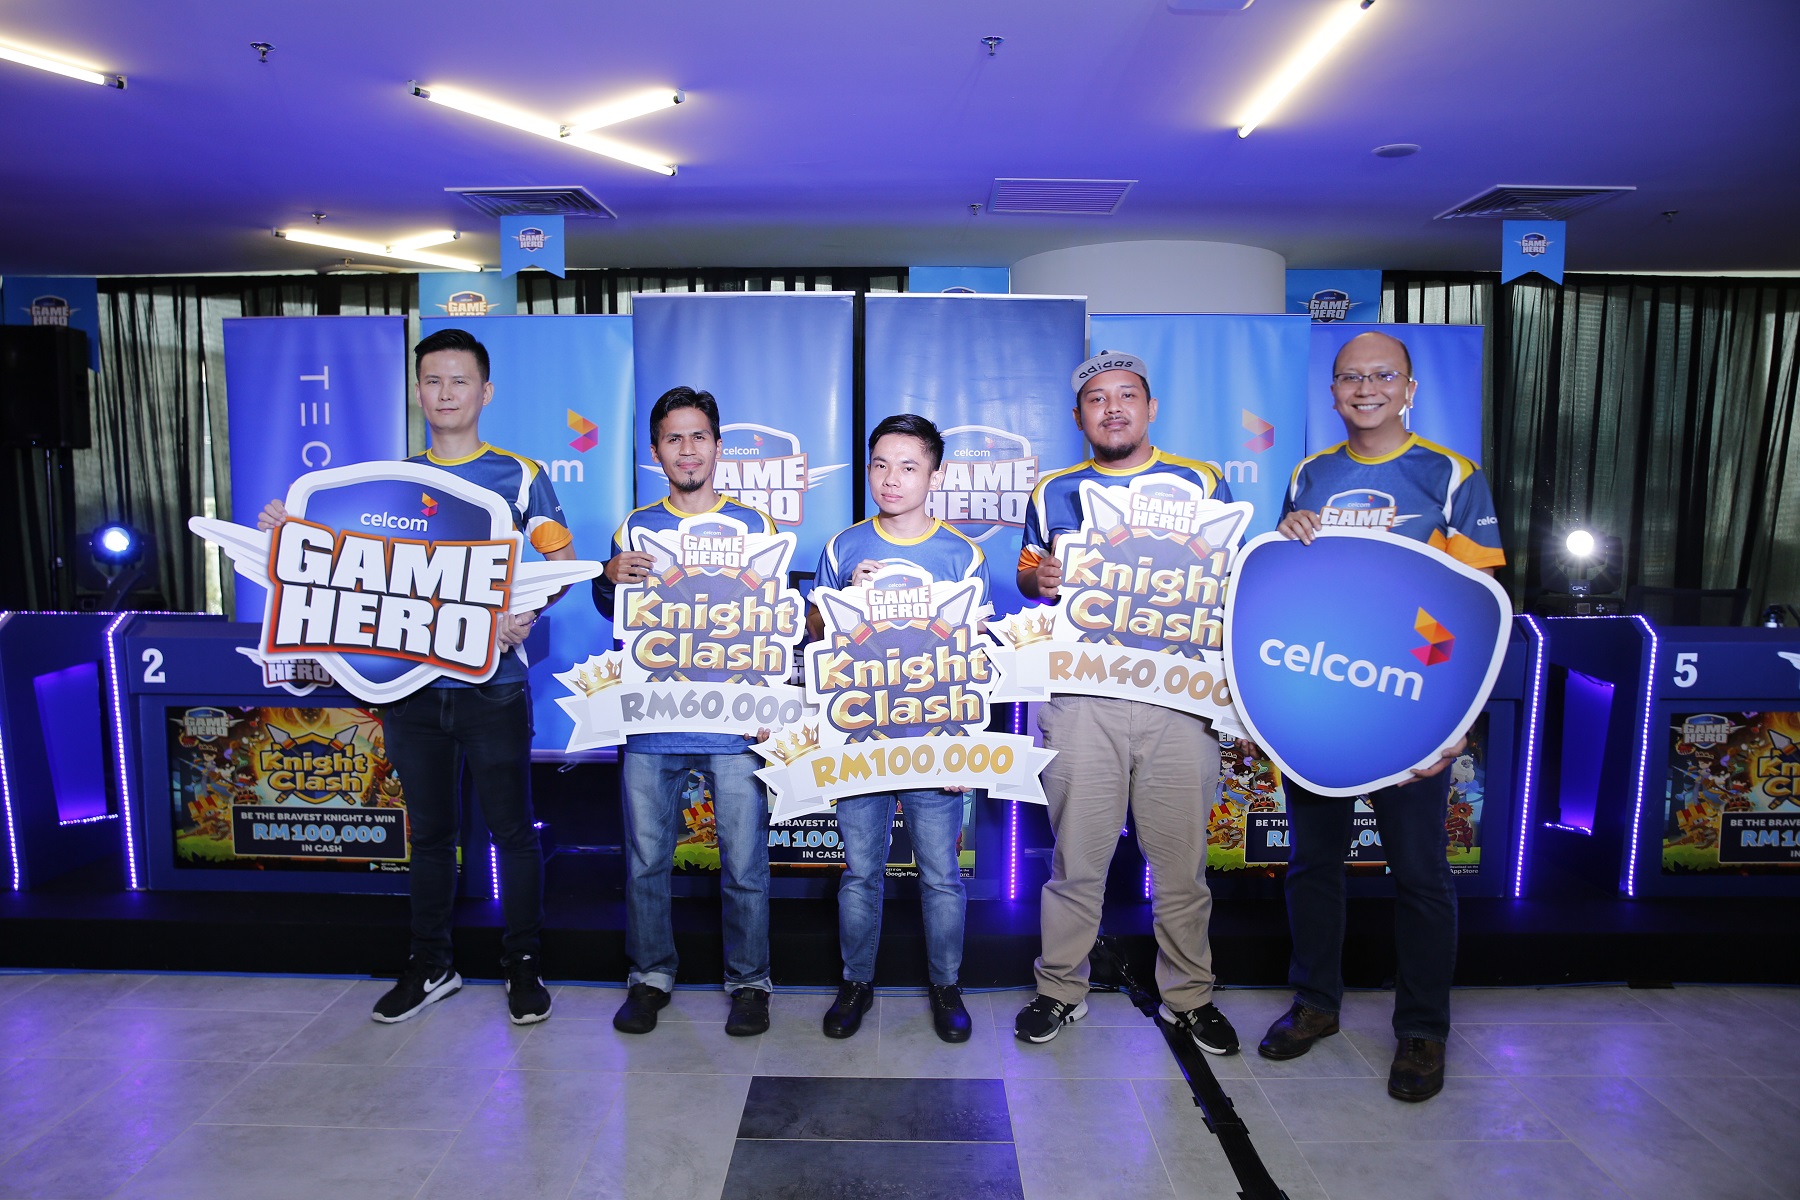 Techninier CTO Alan Pei (left), and Celcom Axiata Bhd head of Consumer Marketing and Analytics Zuwairi Zakaria (right) with the top three winners during the prize giving ceremony for Celcom Game Hero – Knight Clash!